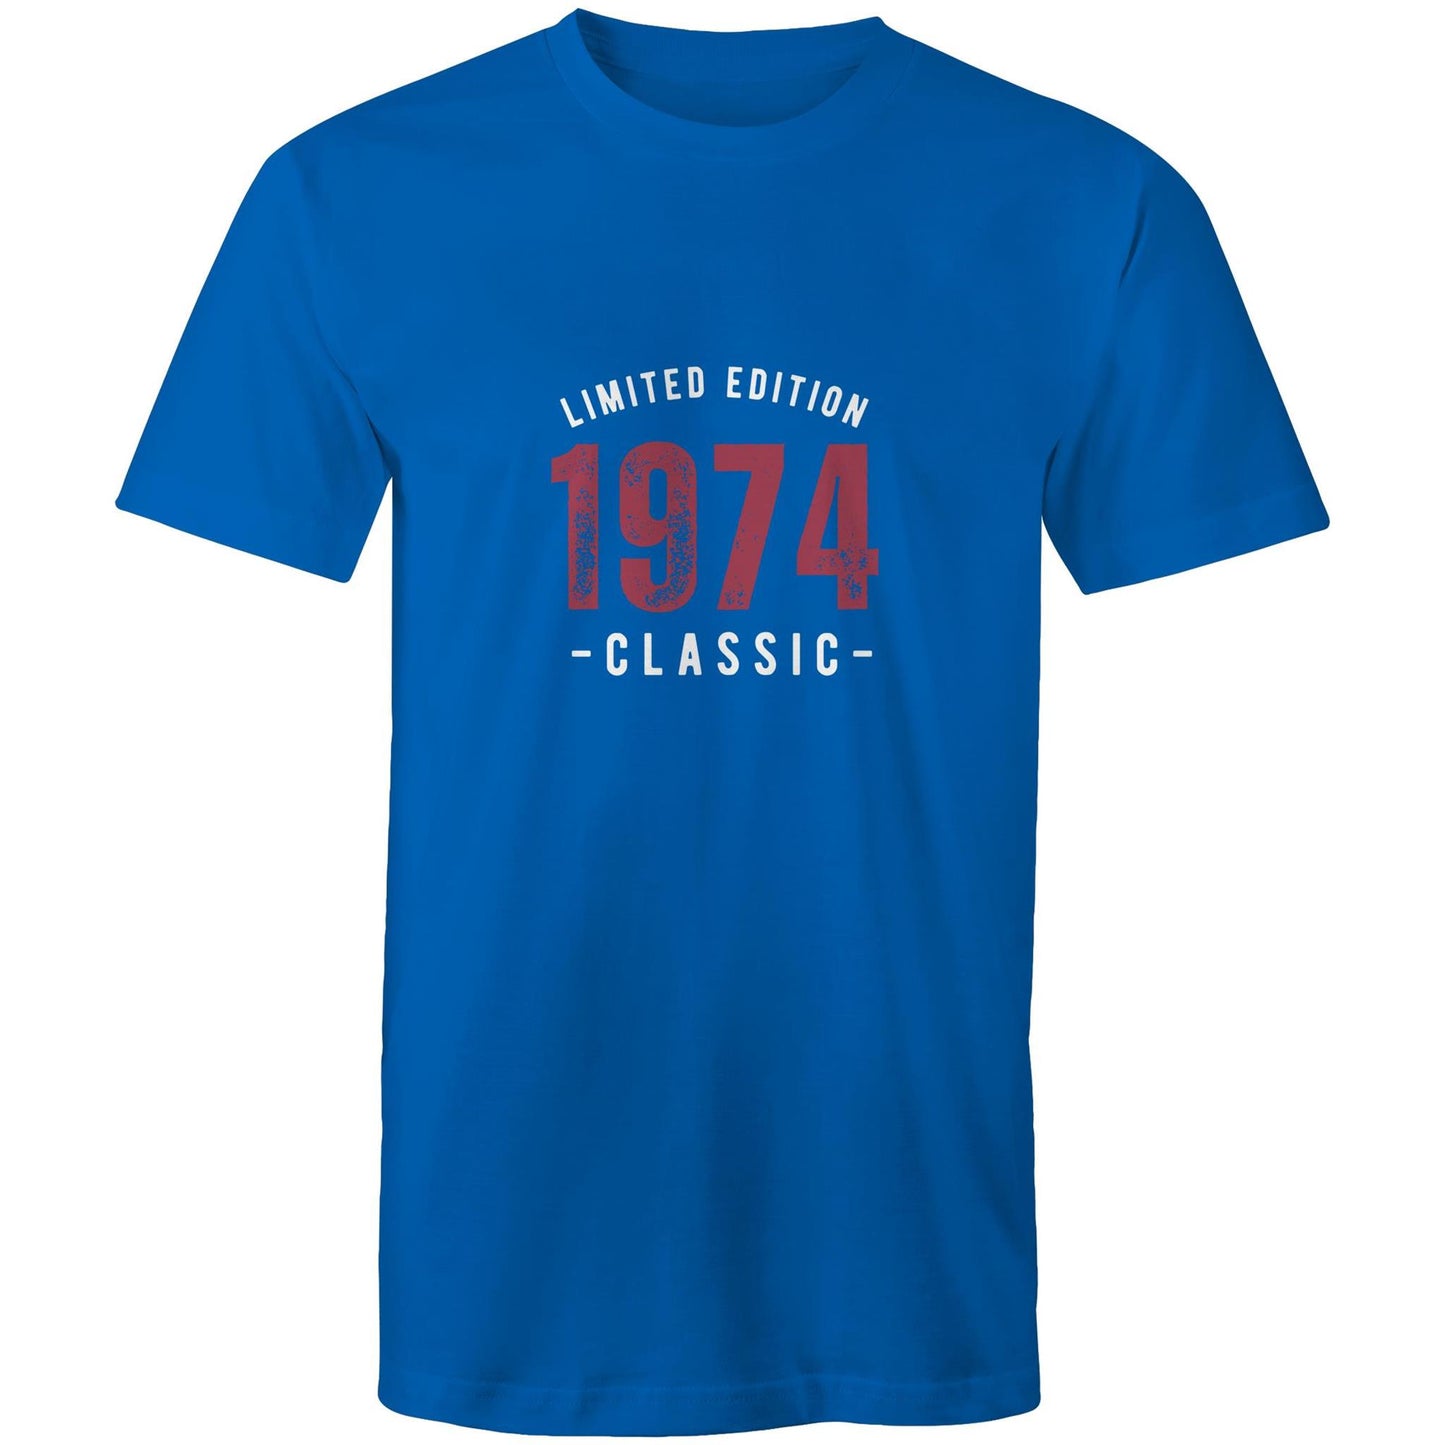 Limited Edition 1974 Classic - Mens T-Shirt